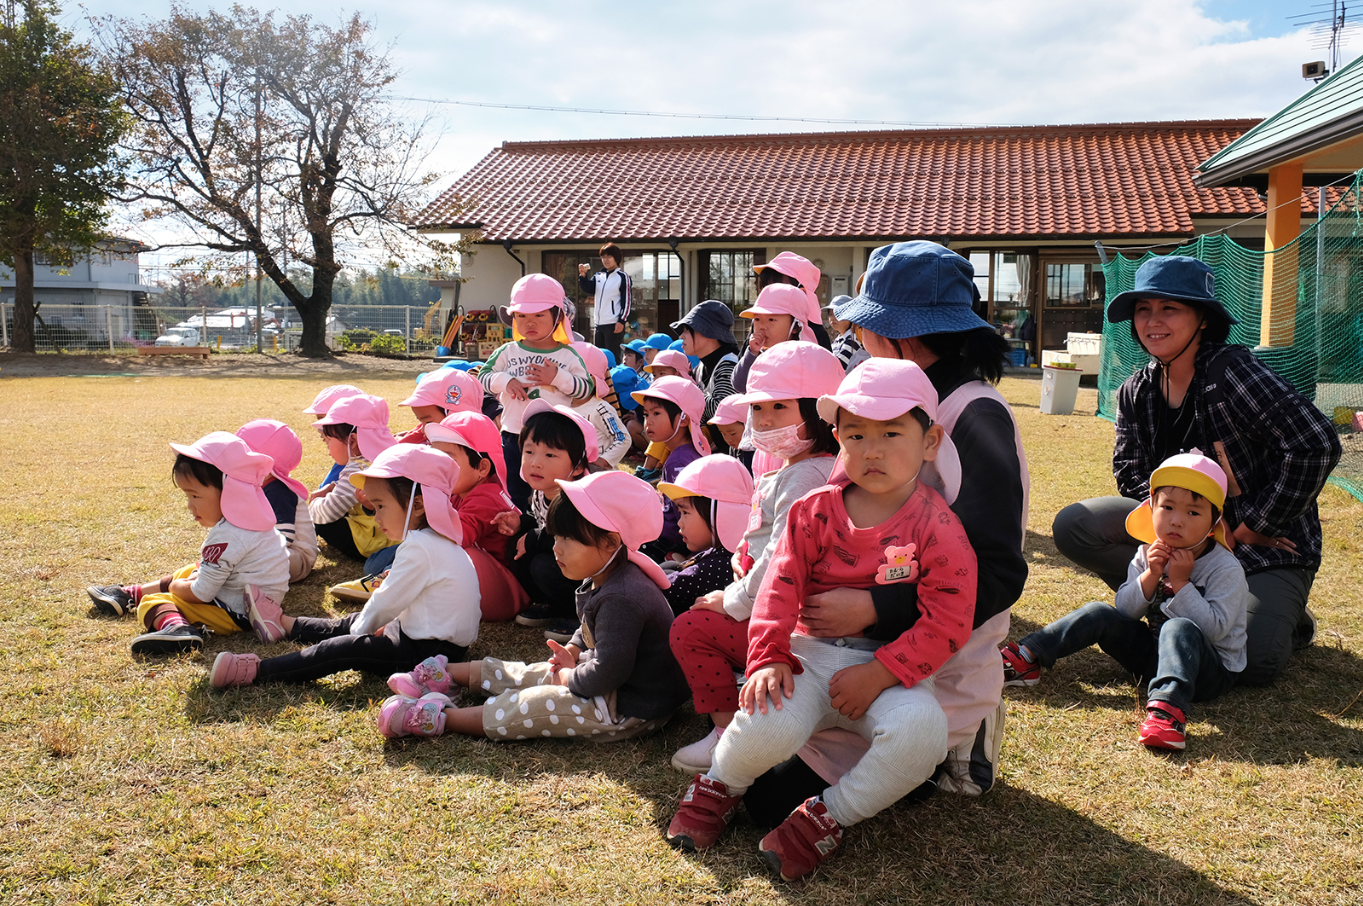 For now, there is no waiting list to get a spot at day care. Image by Emiko Jozuka. Japan, 2018.